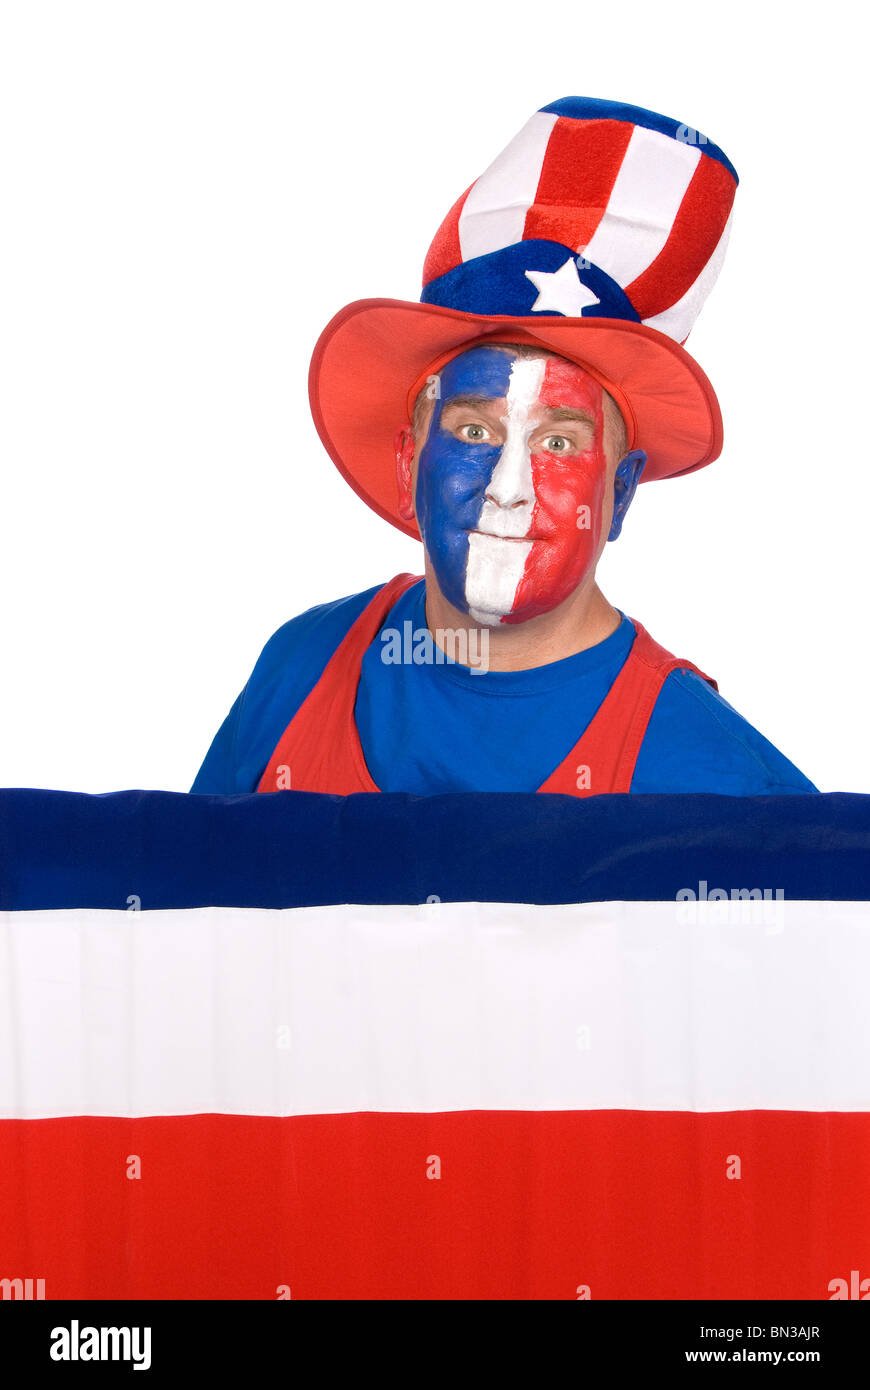 A patriotic man dressed in fourth of July attire and red, white and blue make up. Stock Photo